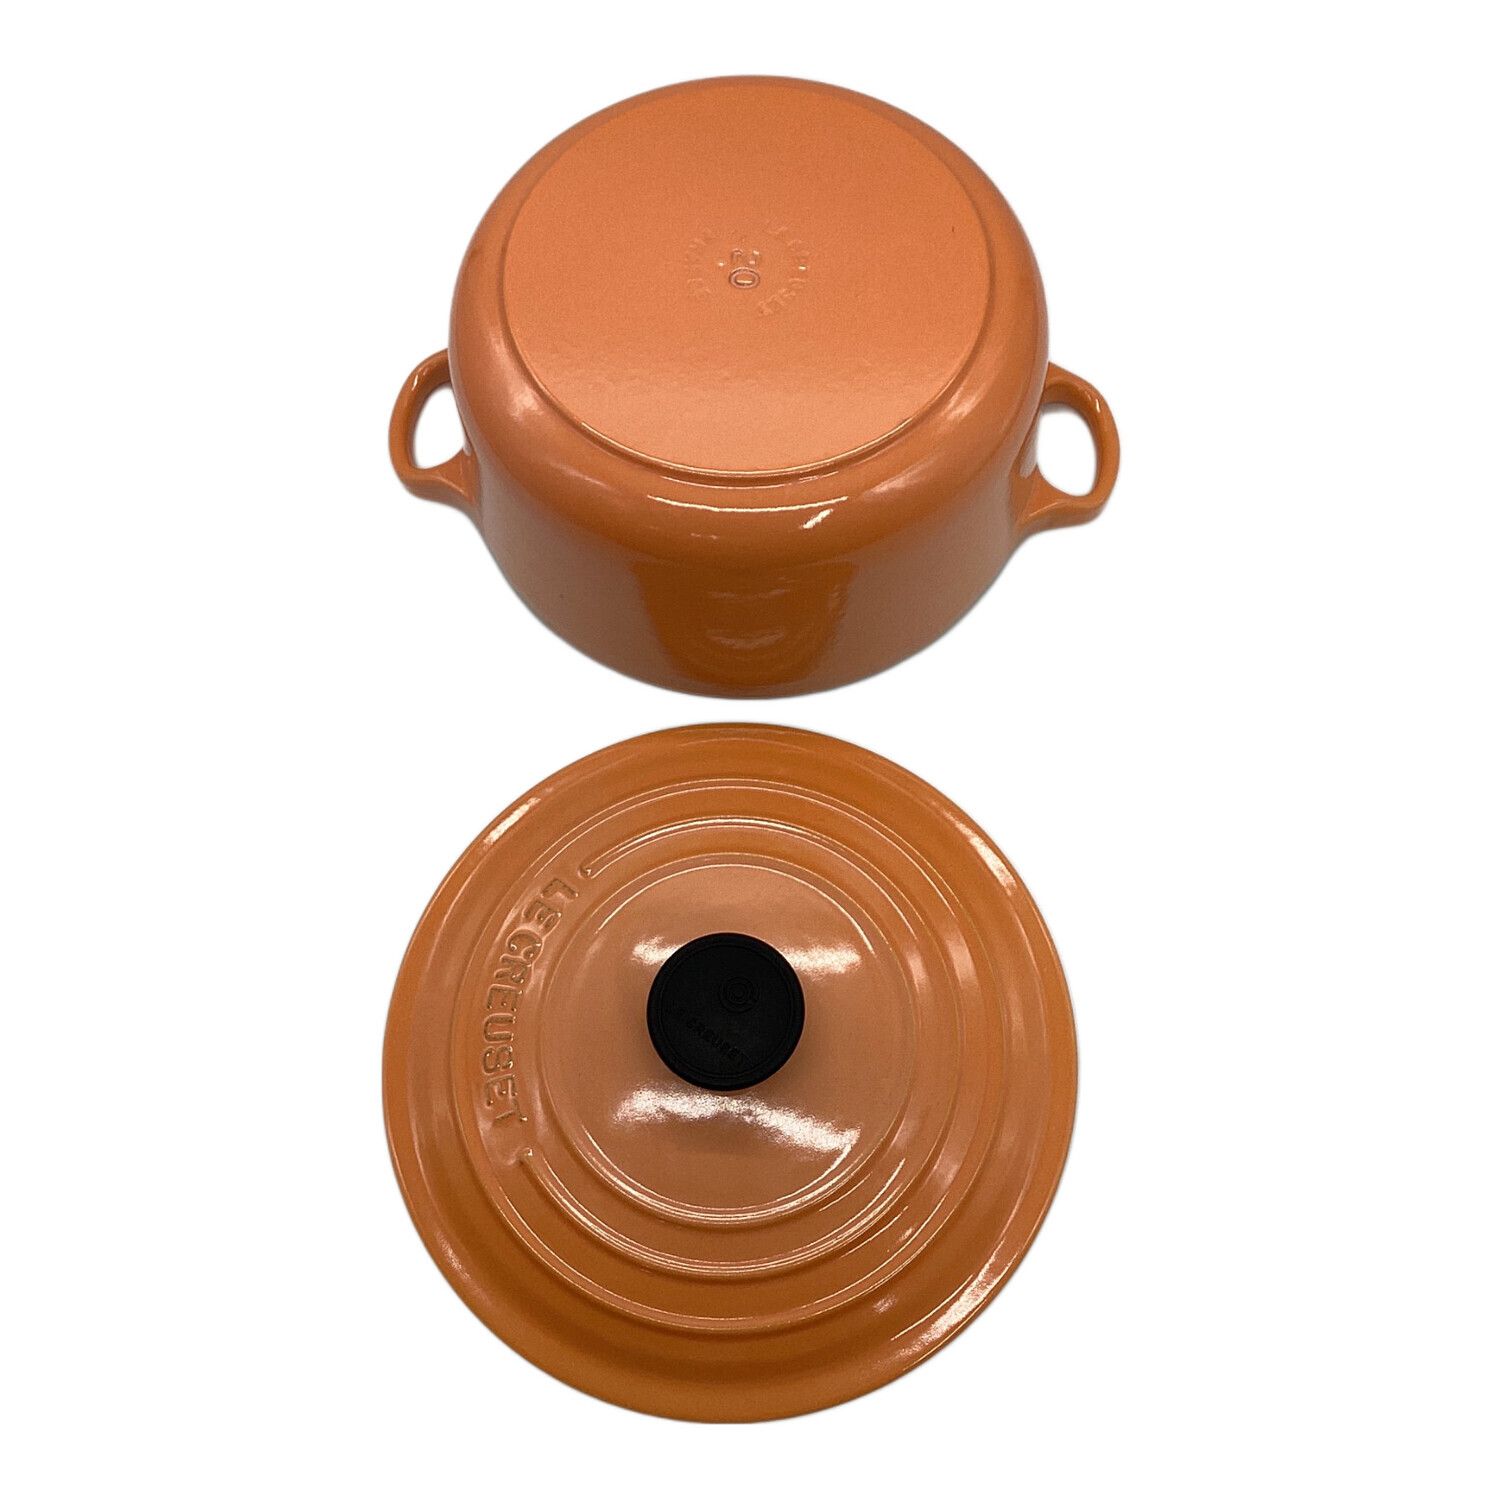 LE CREUSET (ルクルーゼ) 両手鍋 SIZE 20cm サーモンピンク｜トレファクONLINE